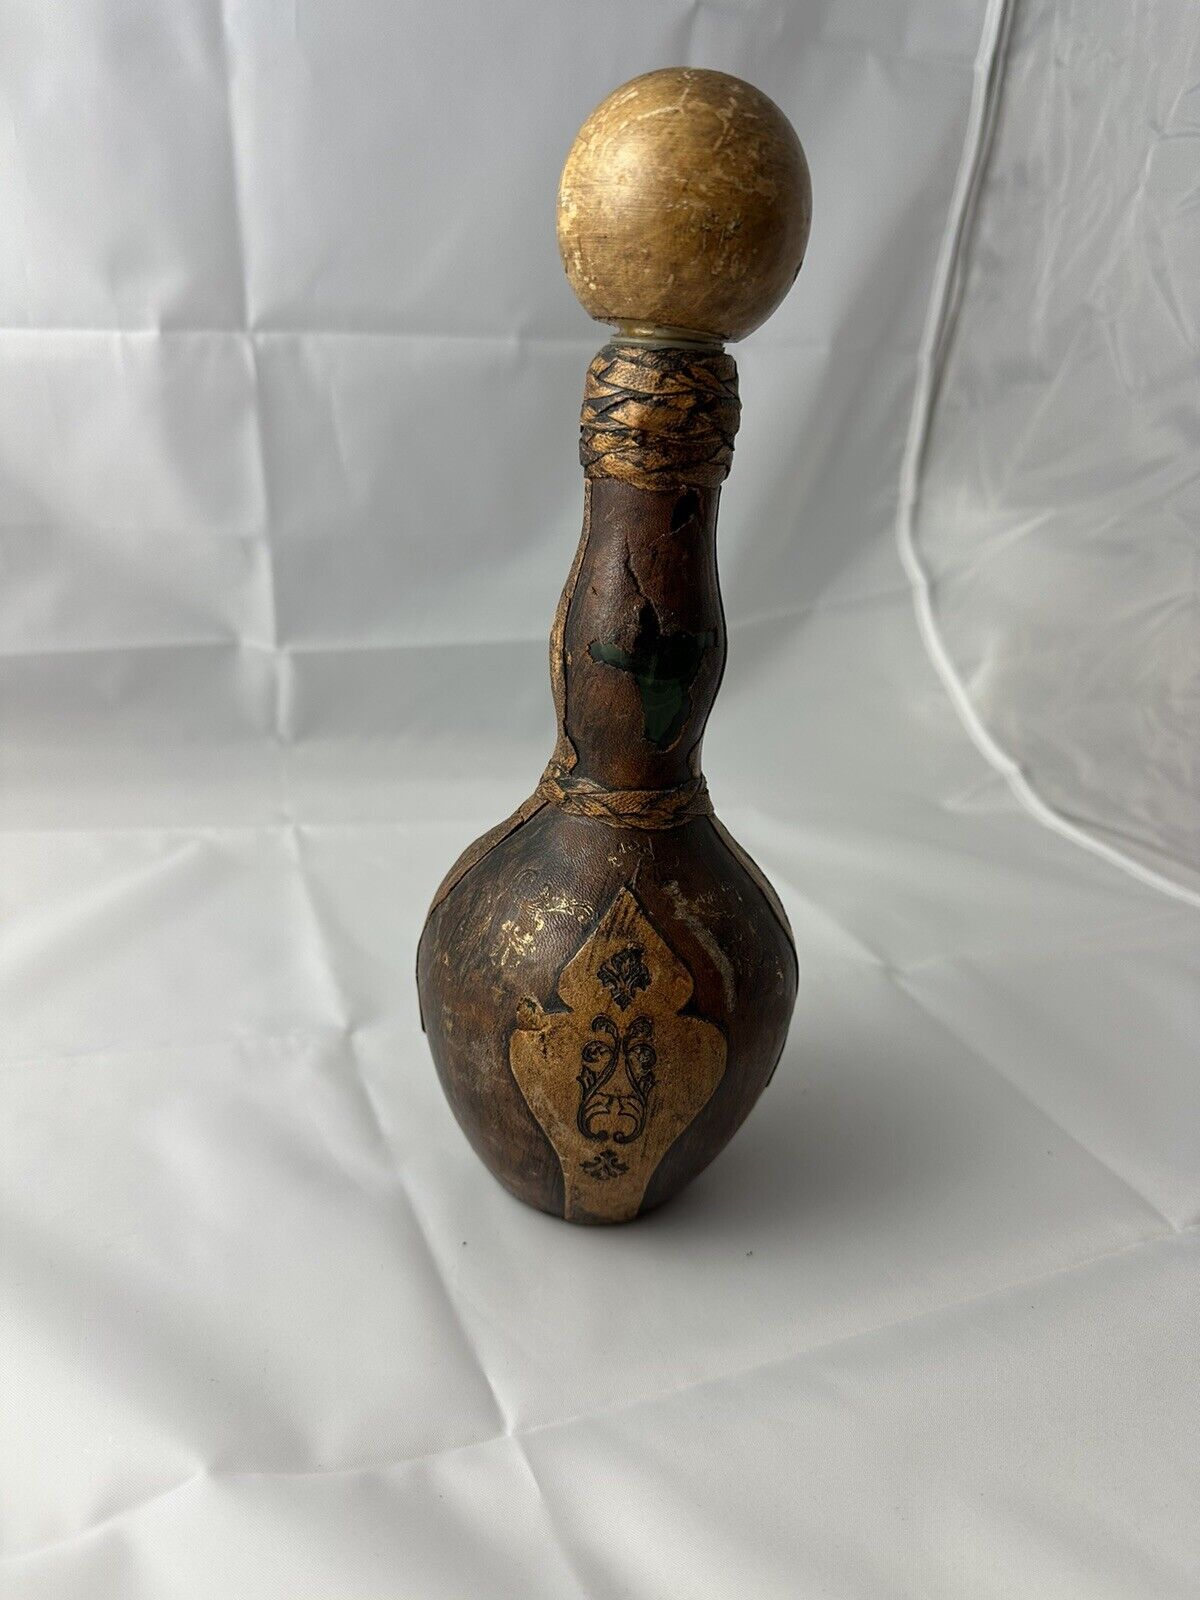 Vintage VTG leather wrapped decanter from Italy